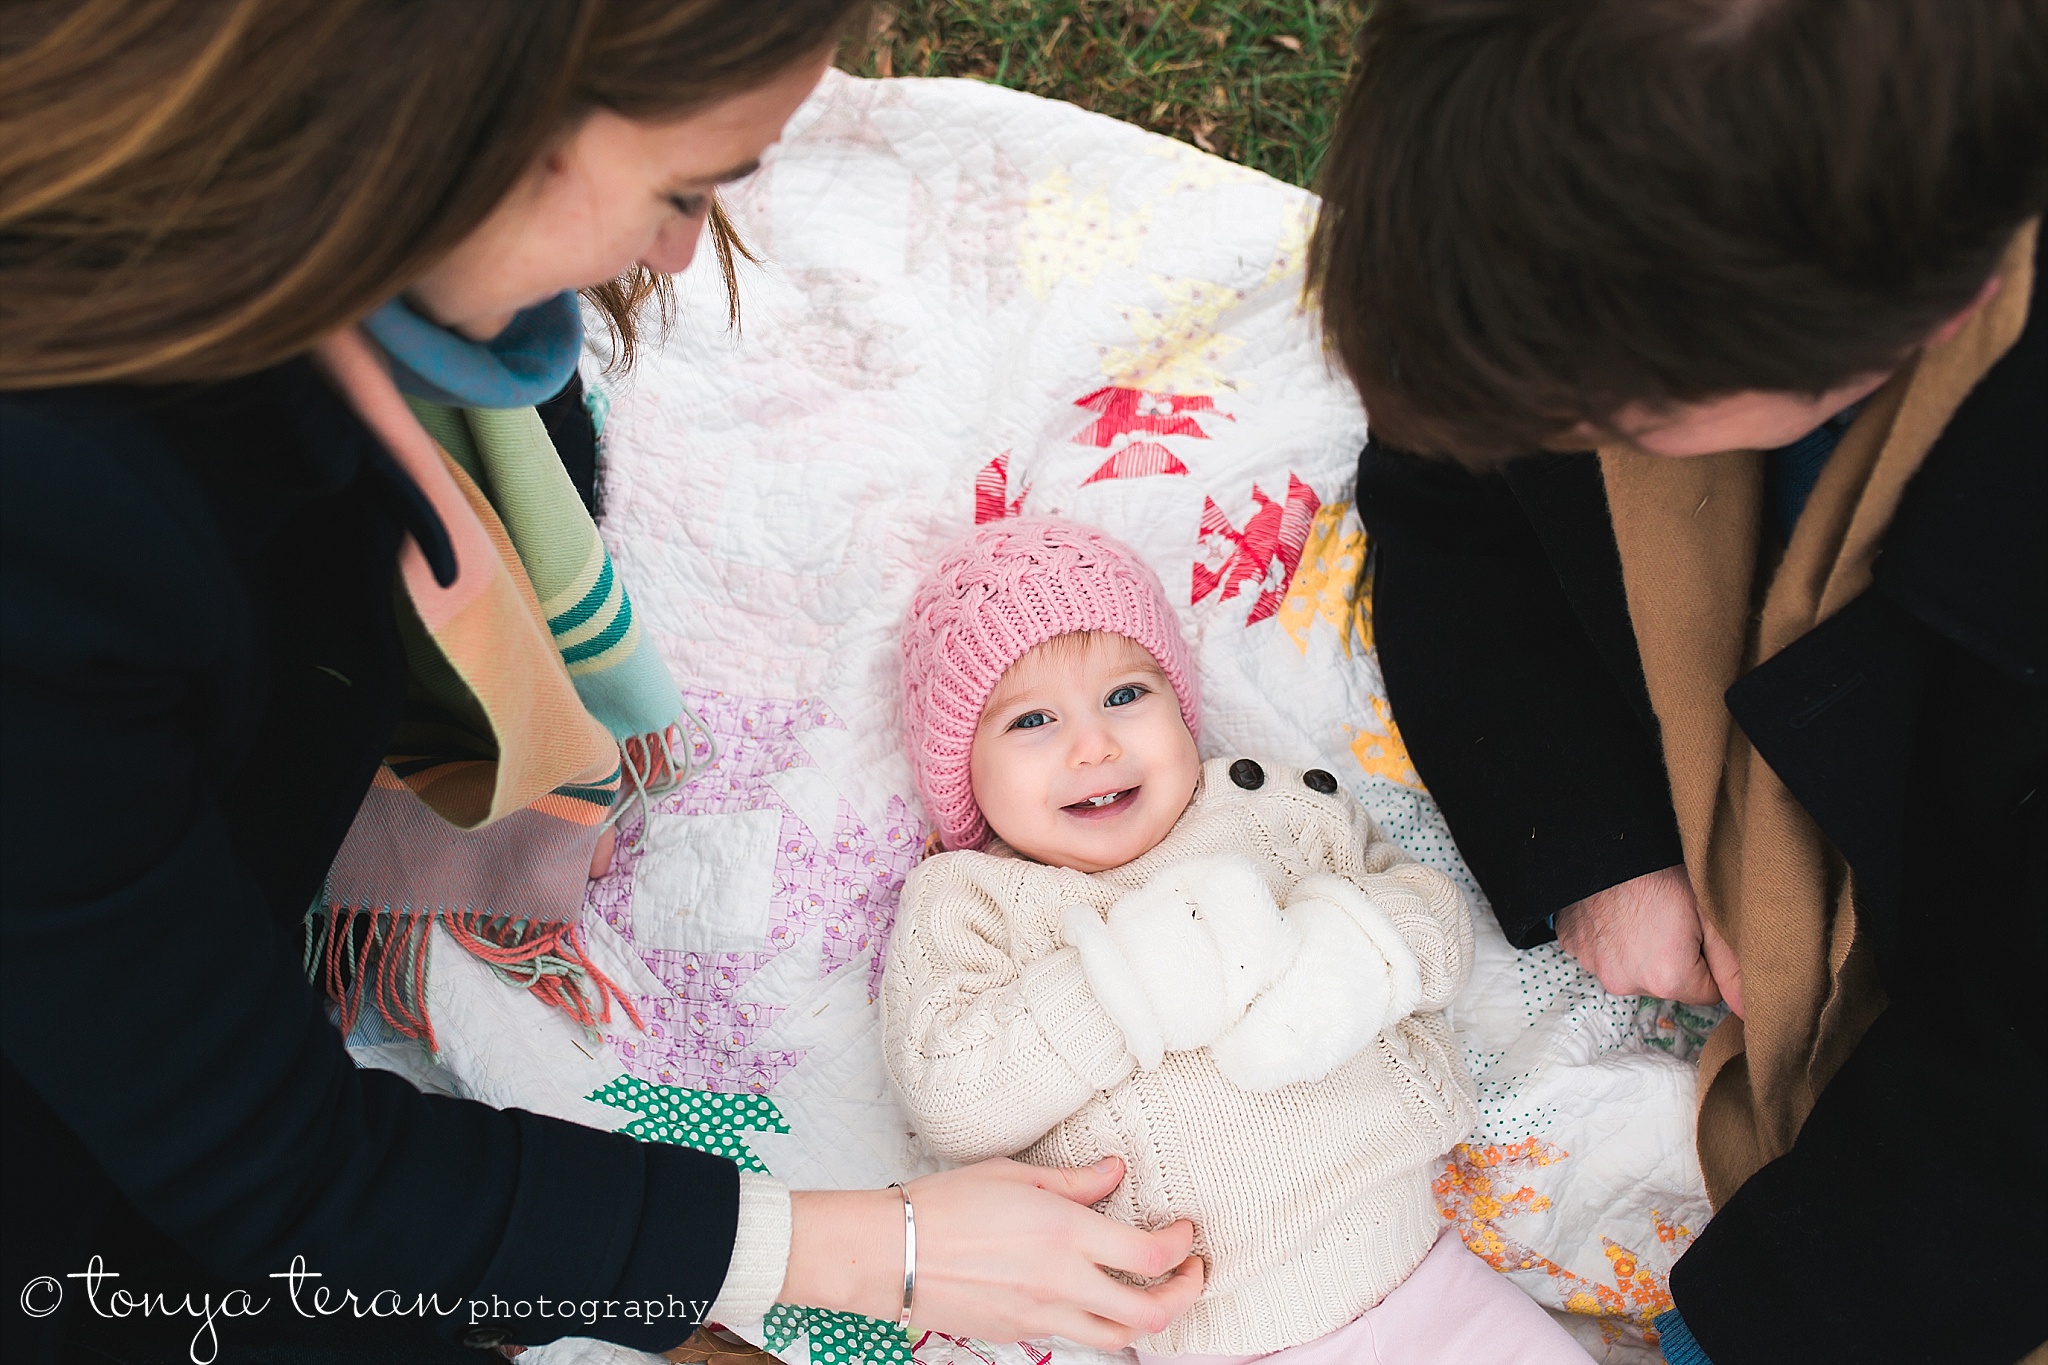 Outdoor Fall Family Photo Session | Tonya Teran Photography, Rockville, MD Newborn, Baby, and Family Photographer